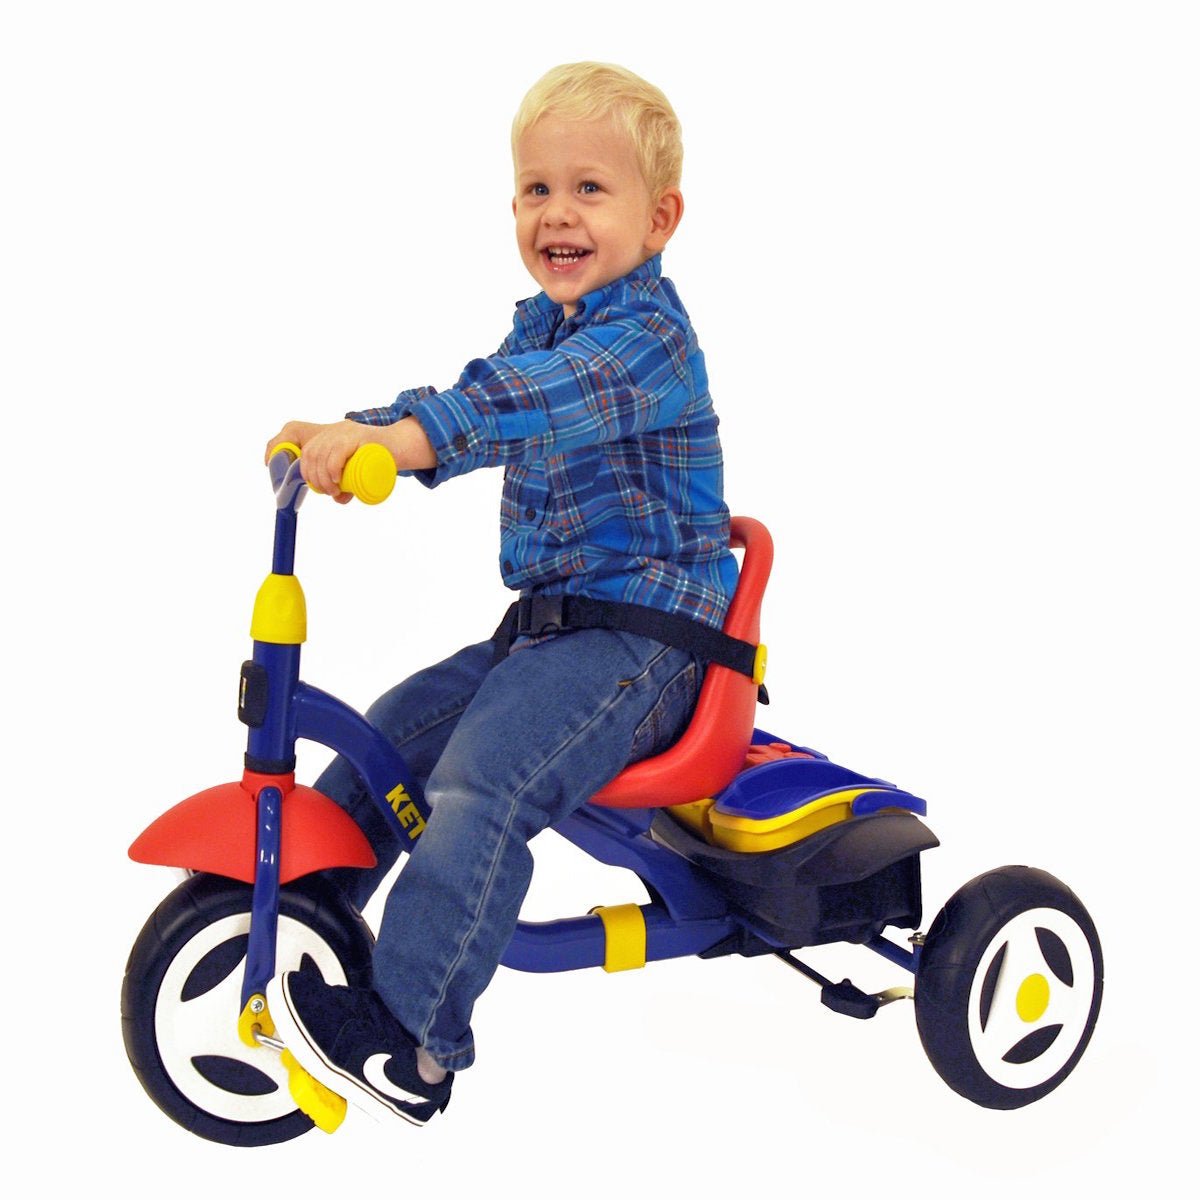 All Kid's Tricycles - Upzy.com